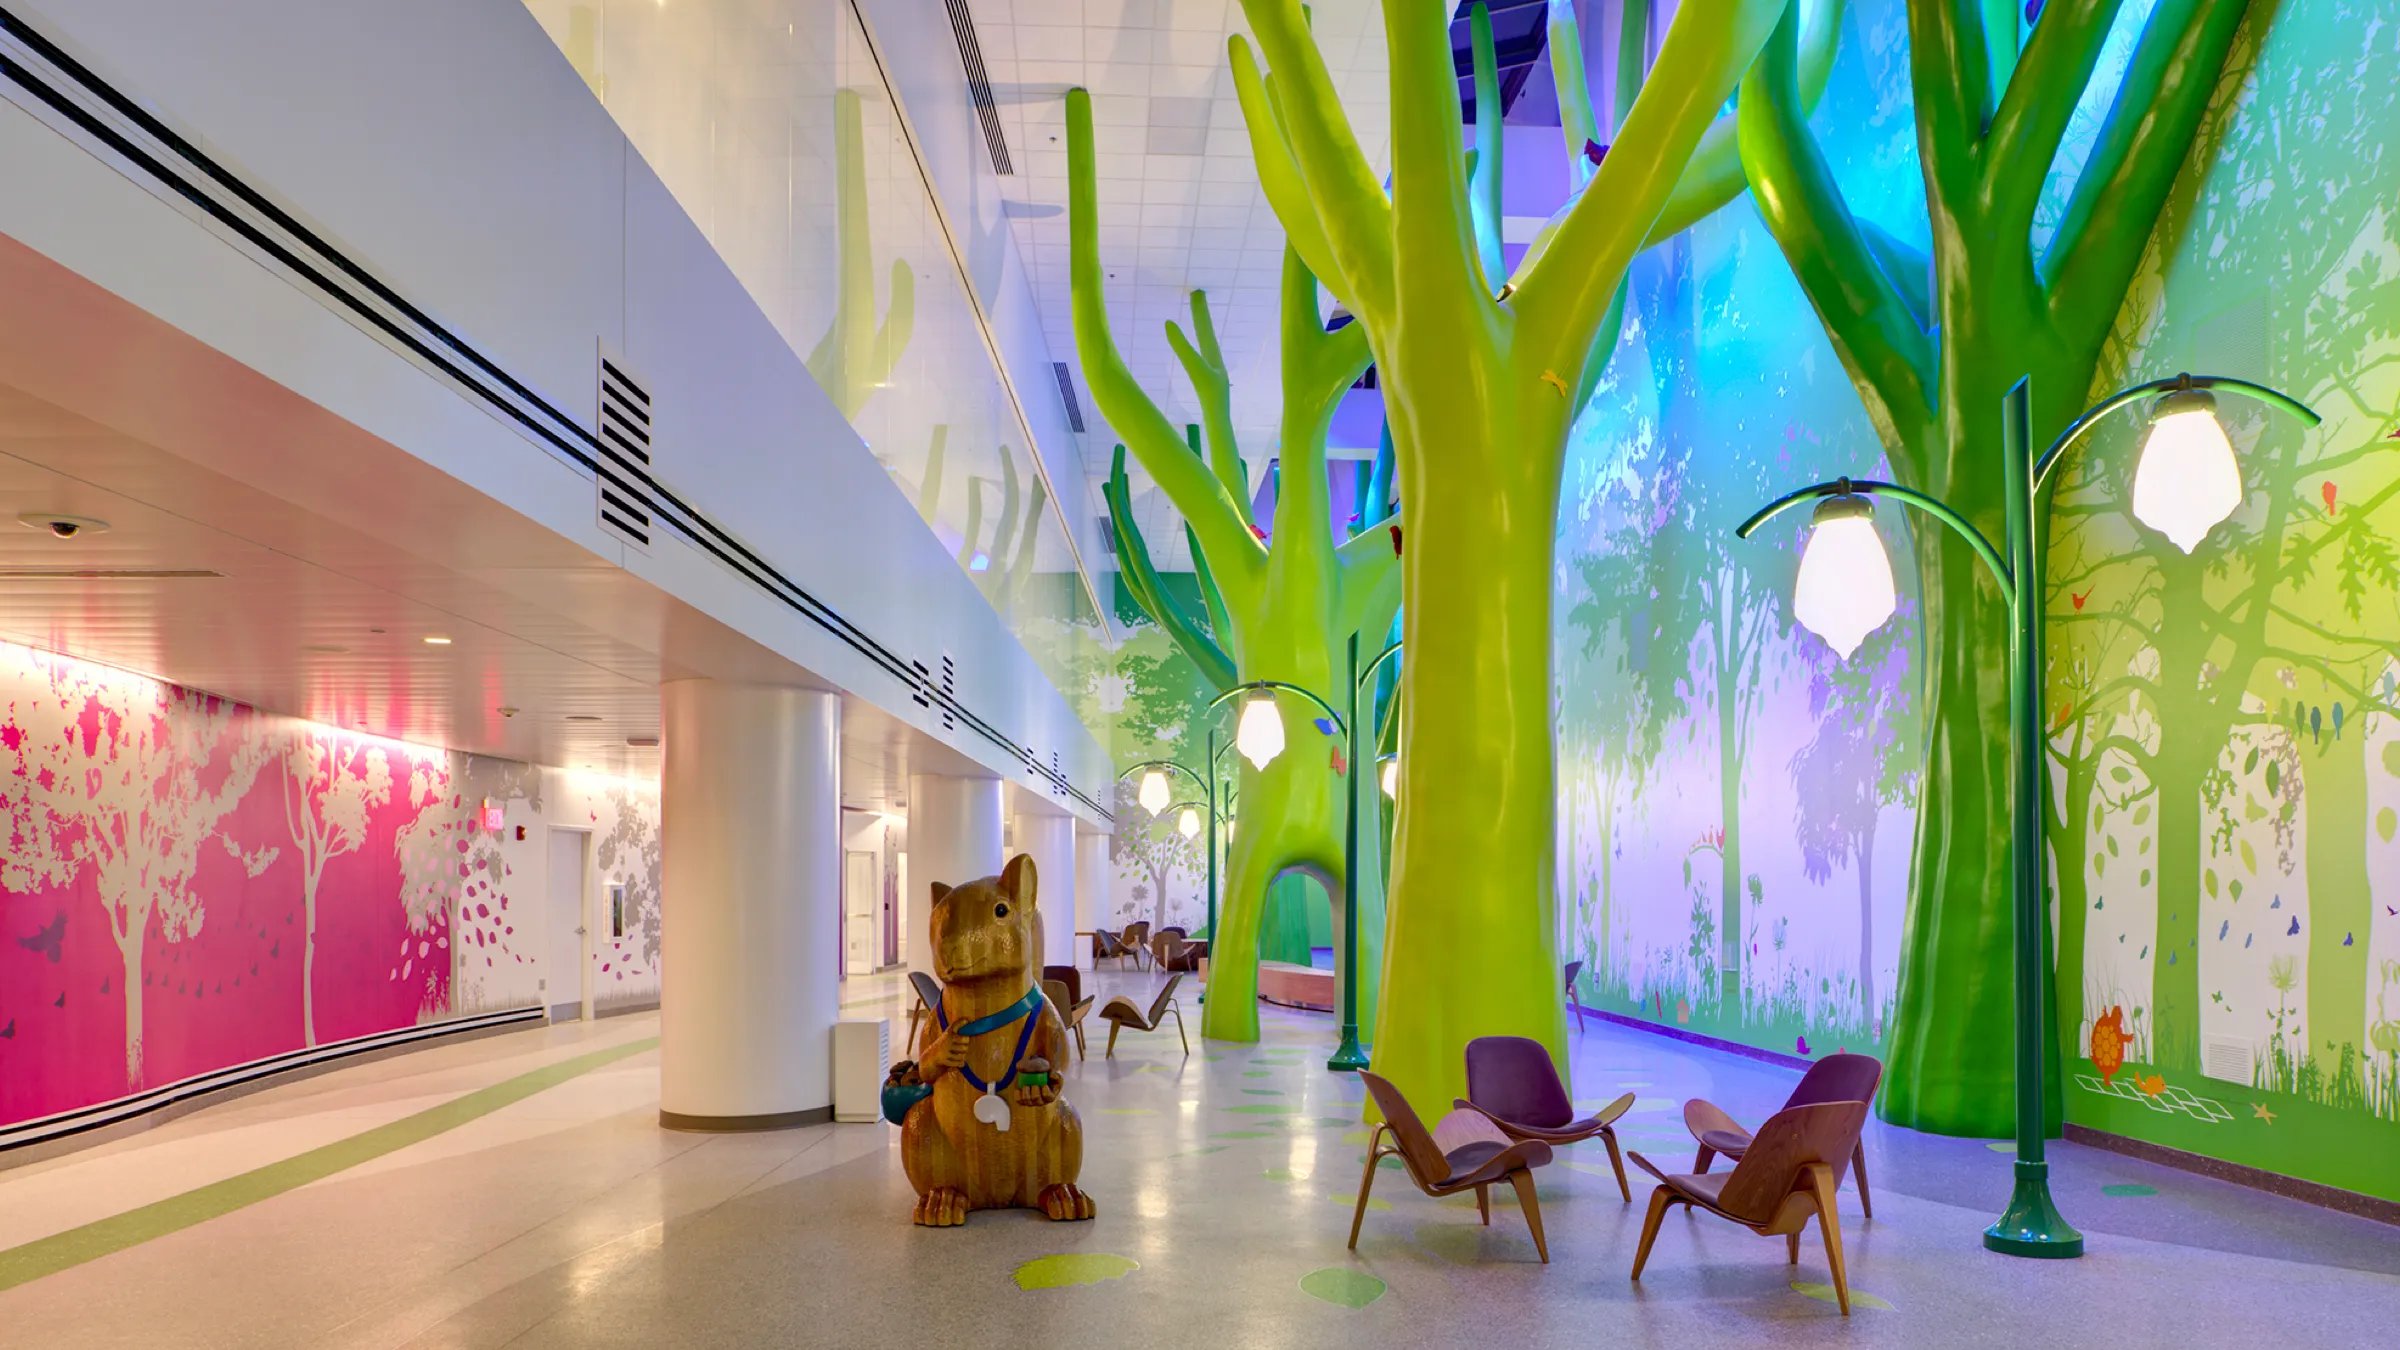 Children's hospital seating area with forest display